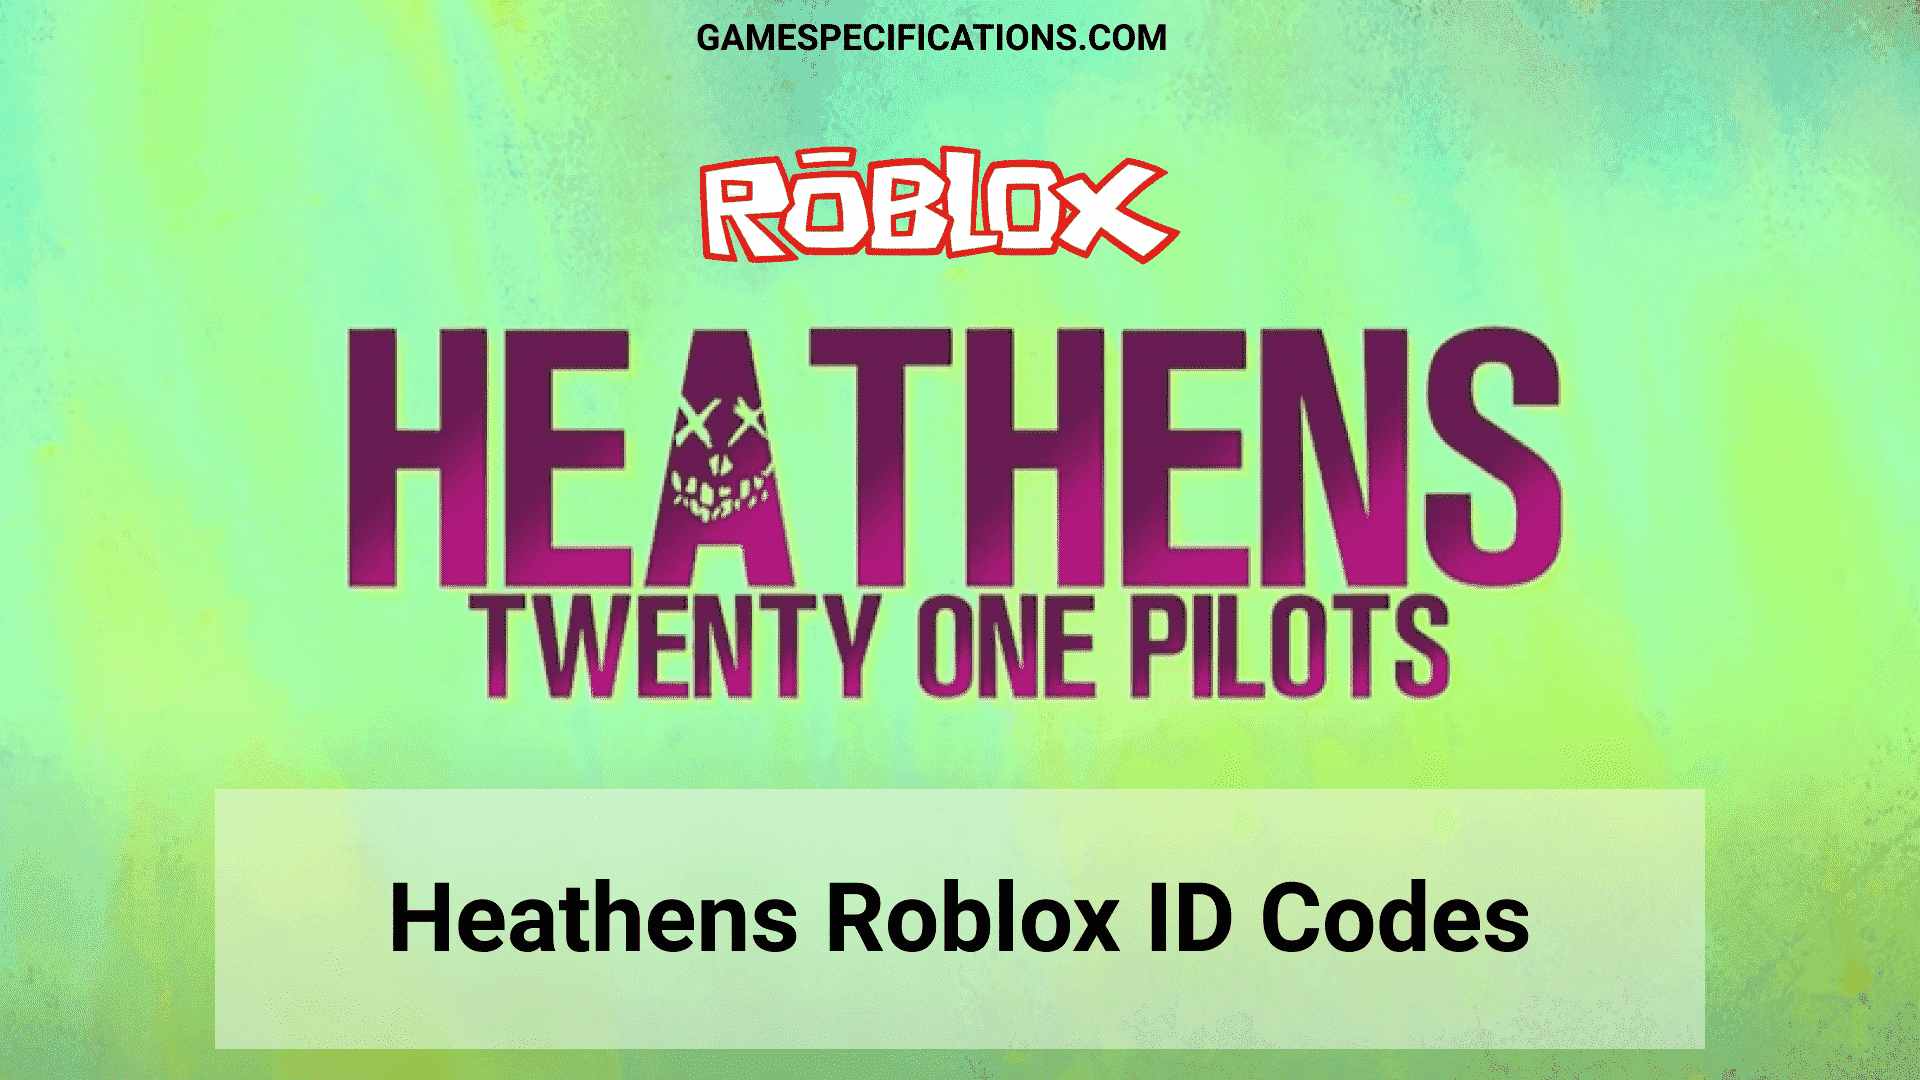 Heathens Roblox Id Codes 2021 Music Codes Game Specifications - fnaf the musical roblox id